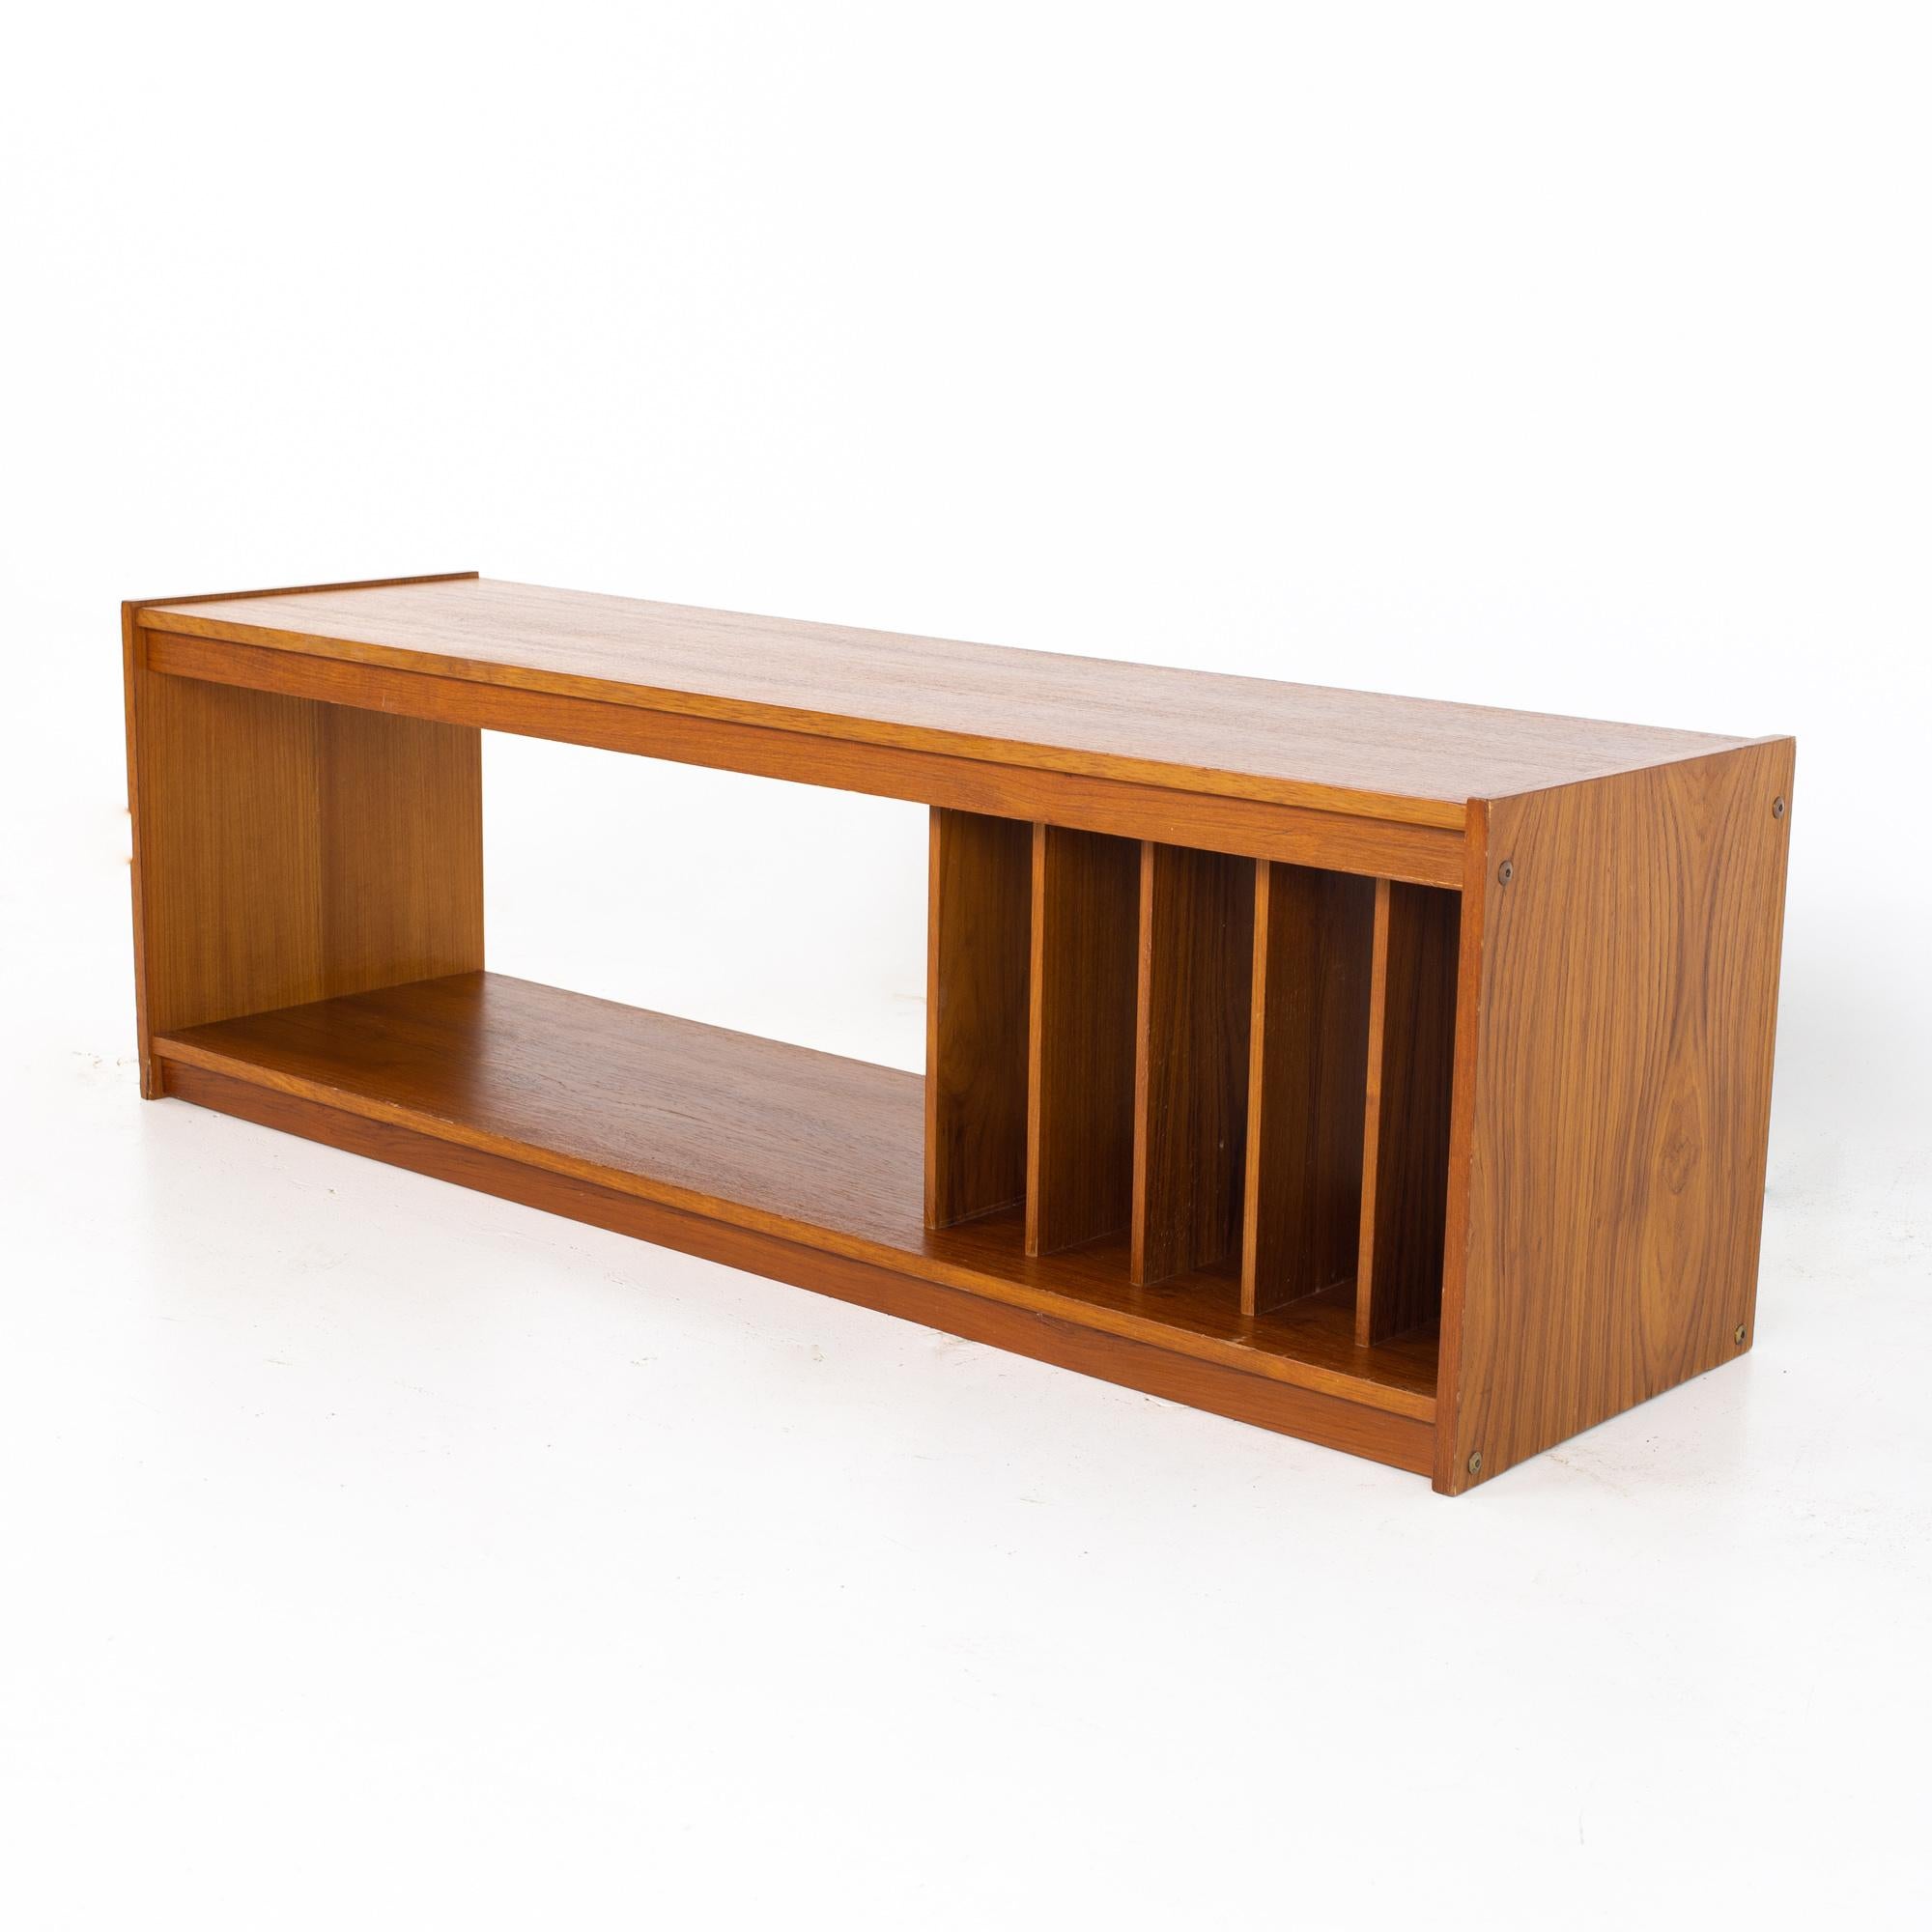 Mid century teak media record console
Console measures: 55 wide x 15.5 deep x 18 inches high

All pieces of furniture can be had in what we call restored vintage condition. That means the piece is restored upon purchase so it’s free of